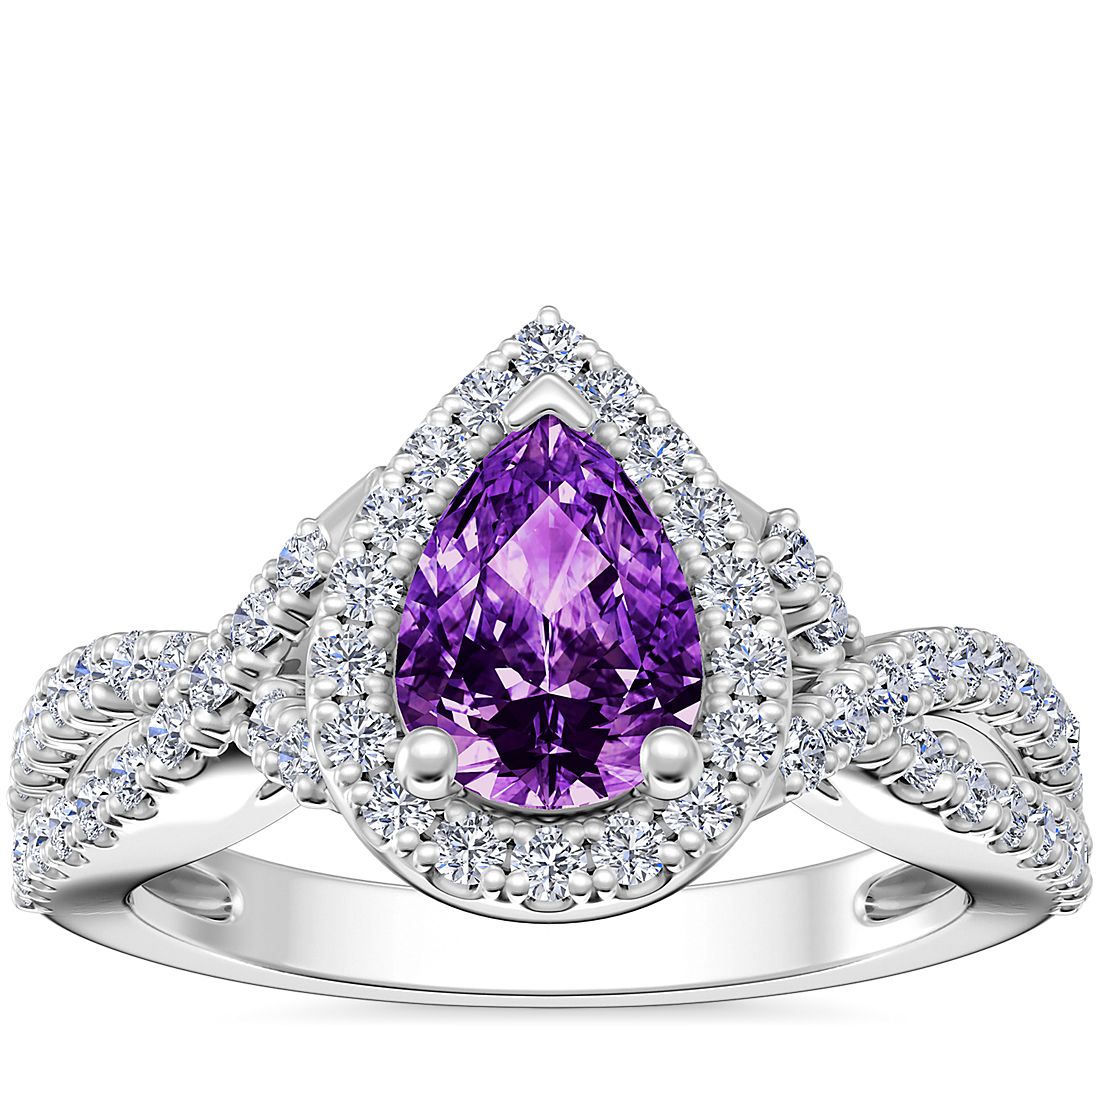 Twist Halo Diamond Engagement Ring with Pear-Shaped Amethyst in Platinum (7x5mm)